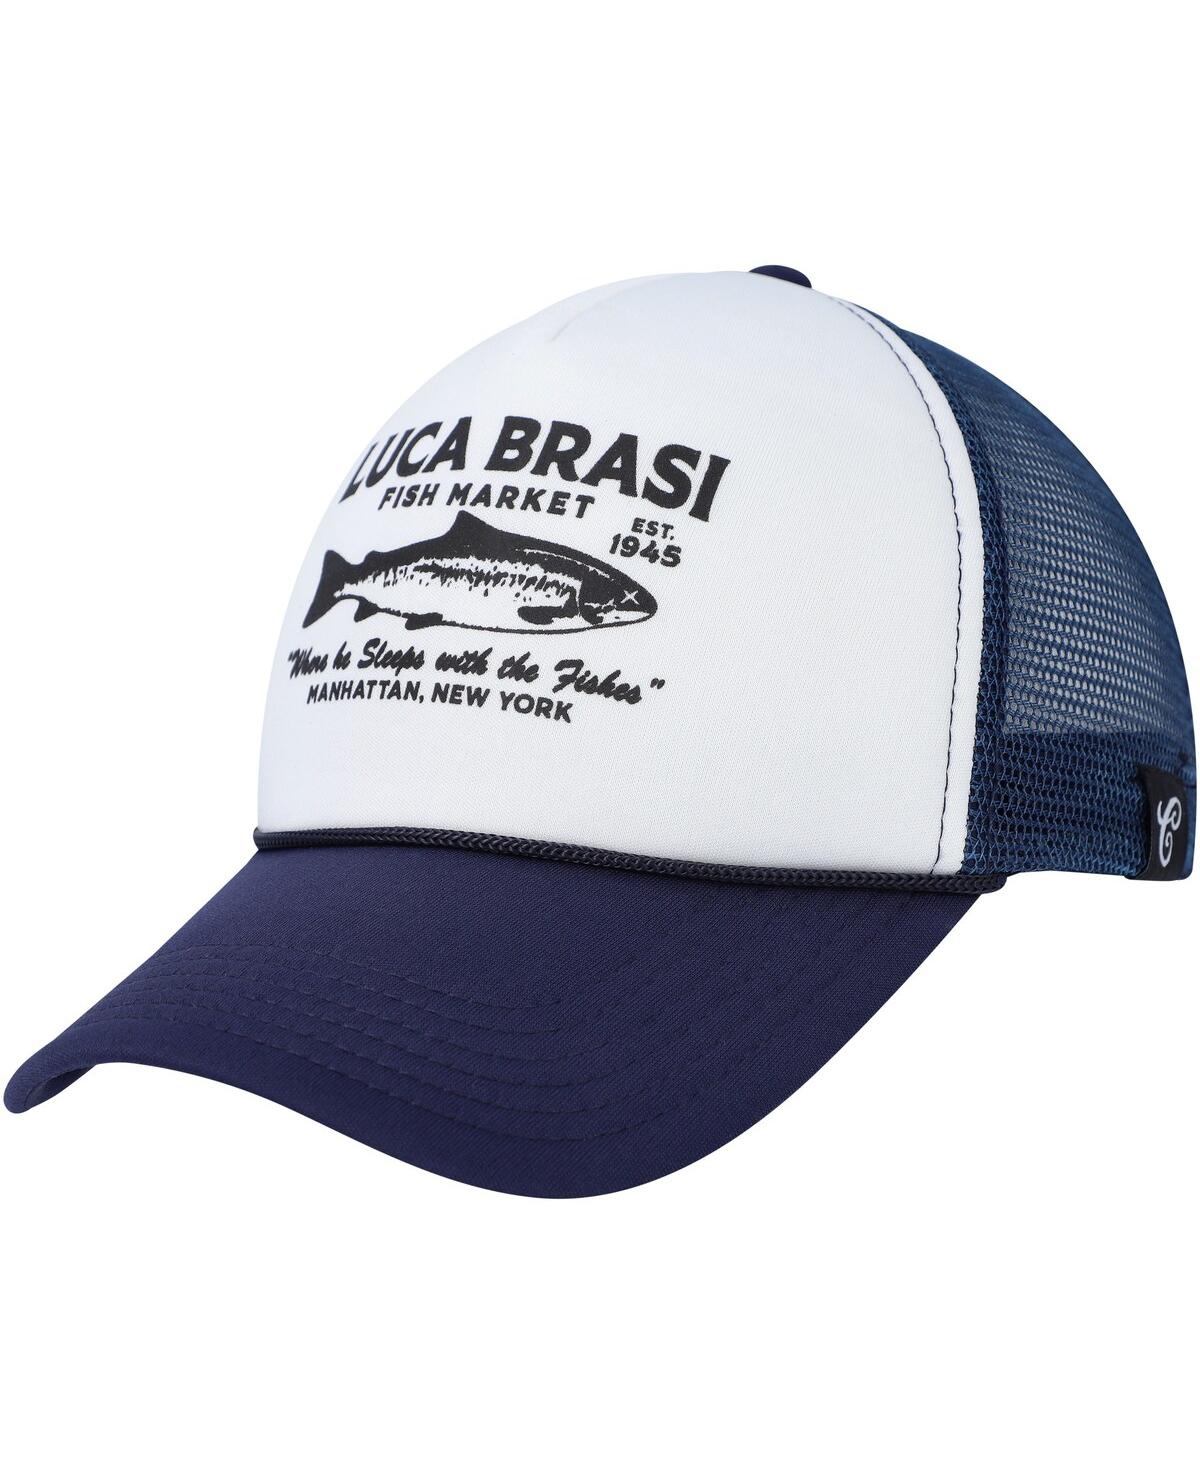 Contenders Clothing Men's And Women's  White, Navy The Godfather Luca Brasi Fish Market Snapback Hat In White,navy